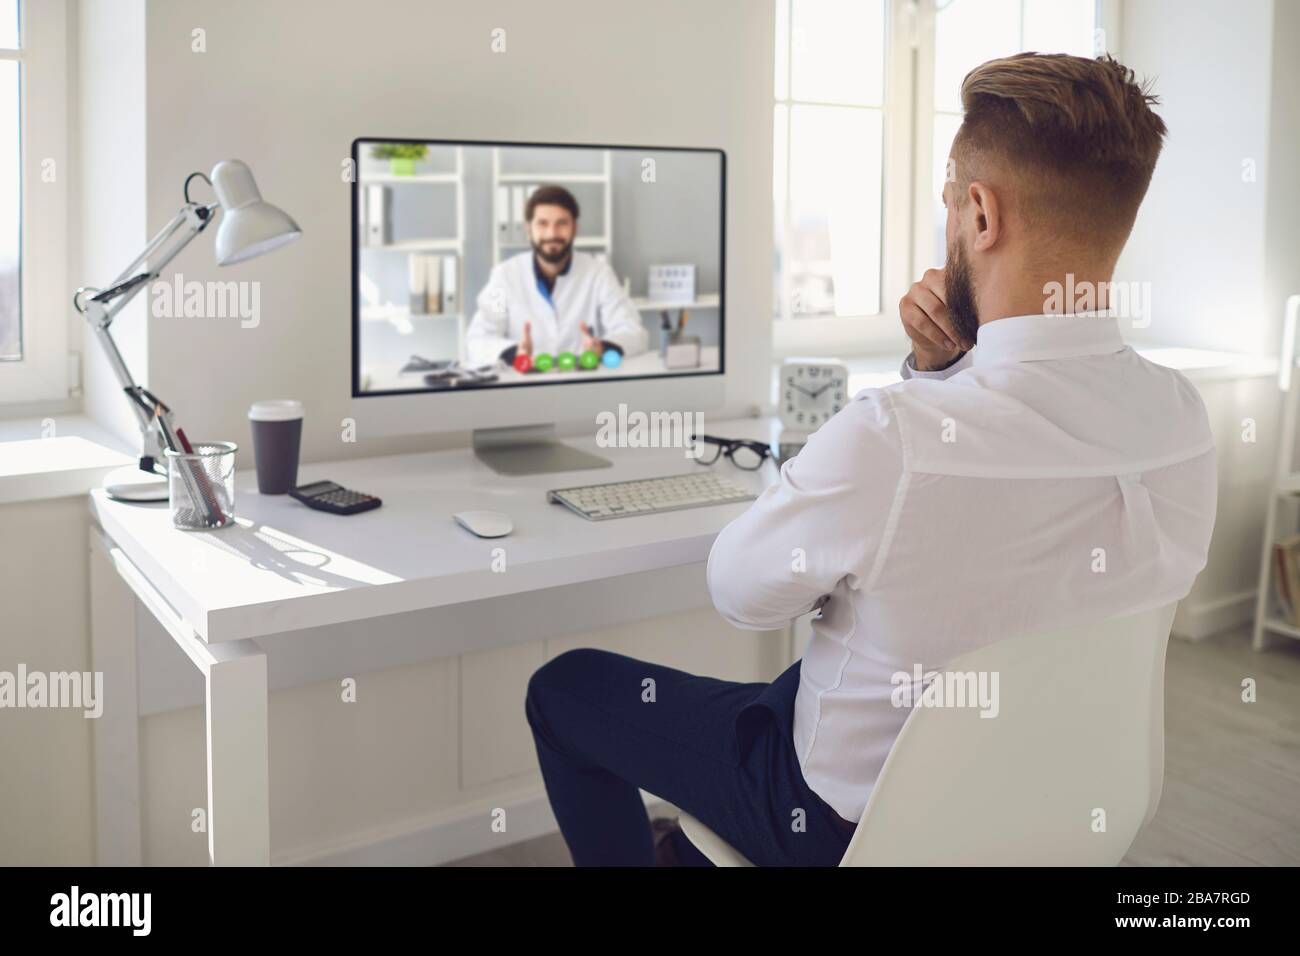 Online doctor.A man talking to a doctor online on a computer on a desk in an office. Online medical consultation. Stock Photo